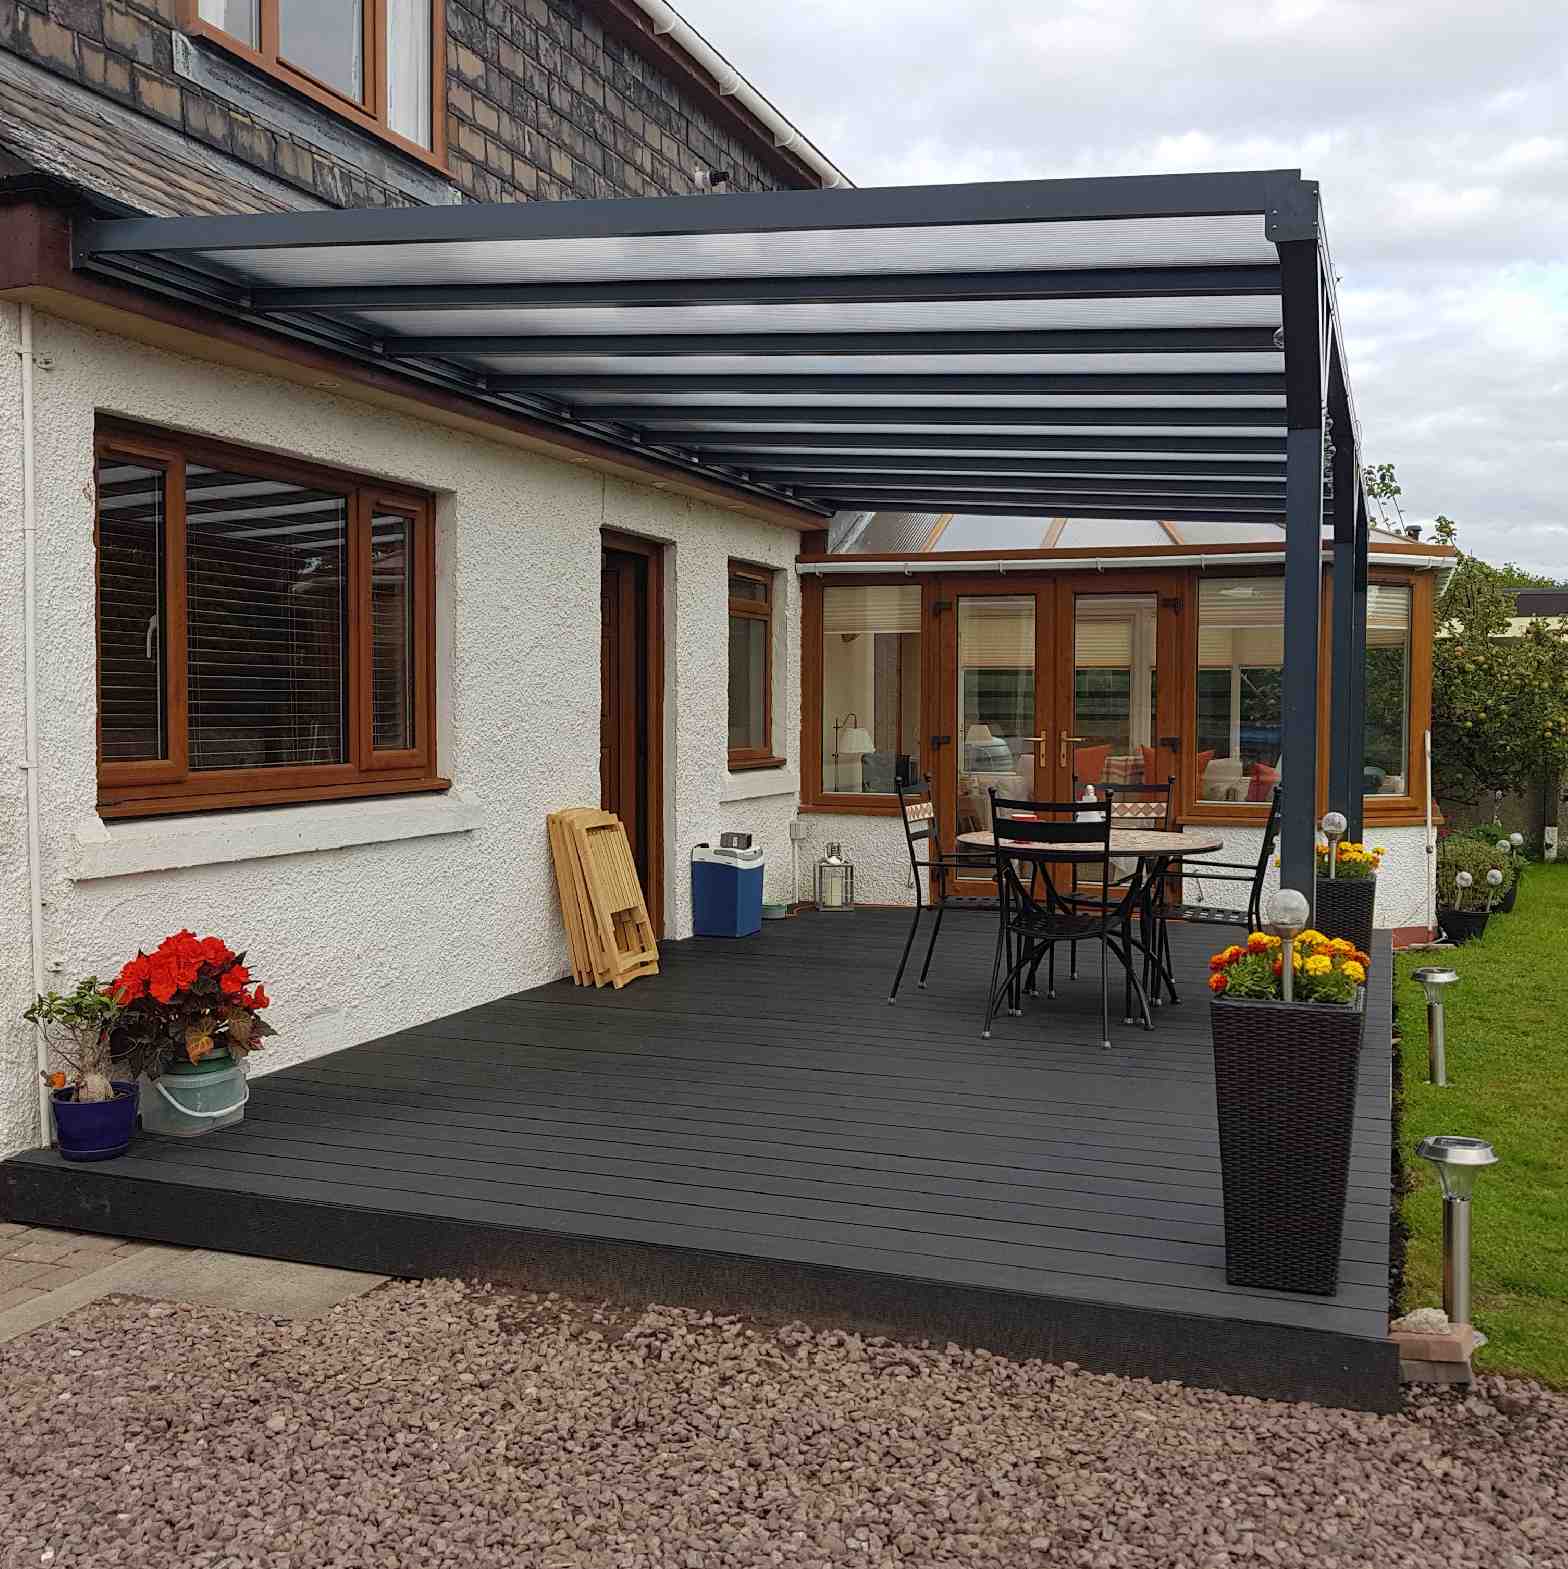 Buy Omega Verandah, Anthracite Grey, 16mm Polycarbonate Glazing - 8.4m (W) x 3.0m (P), (4) Supporting Posts online today